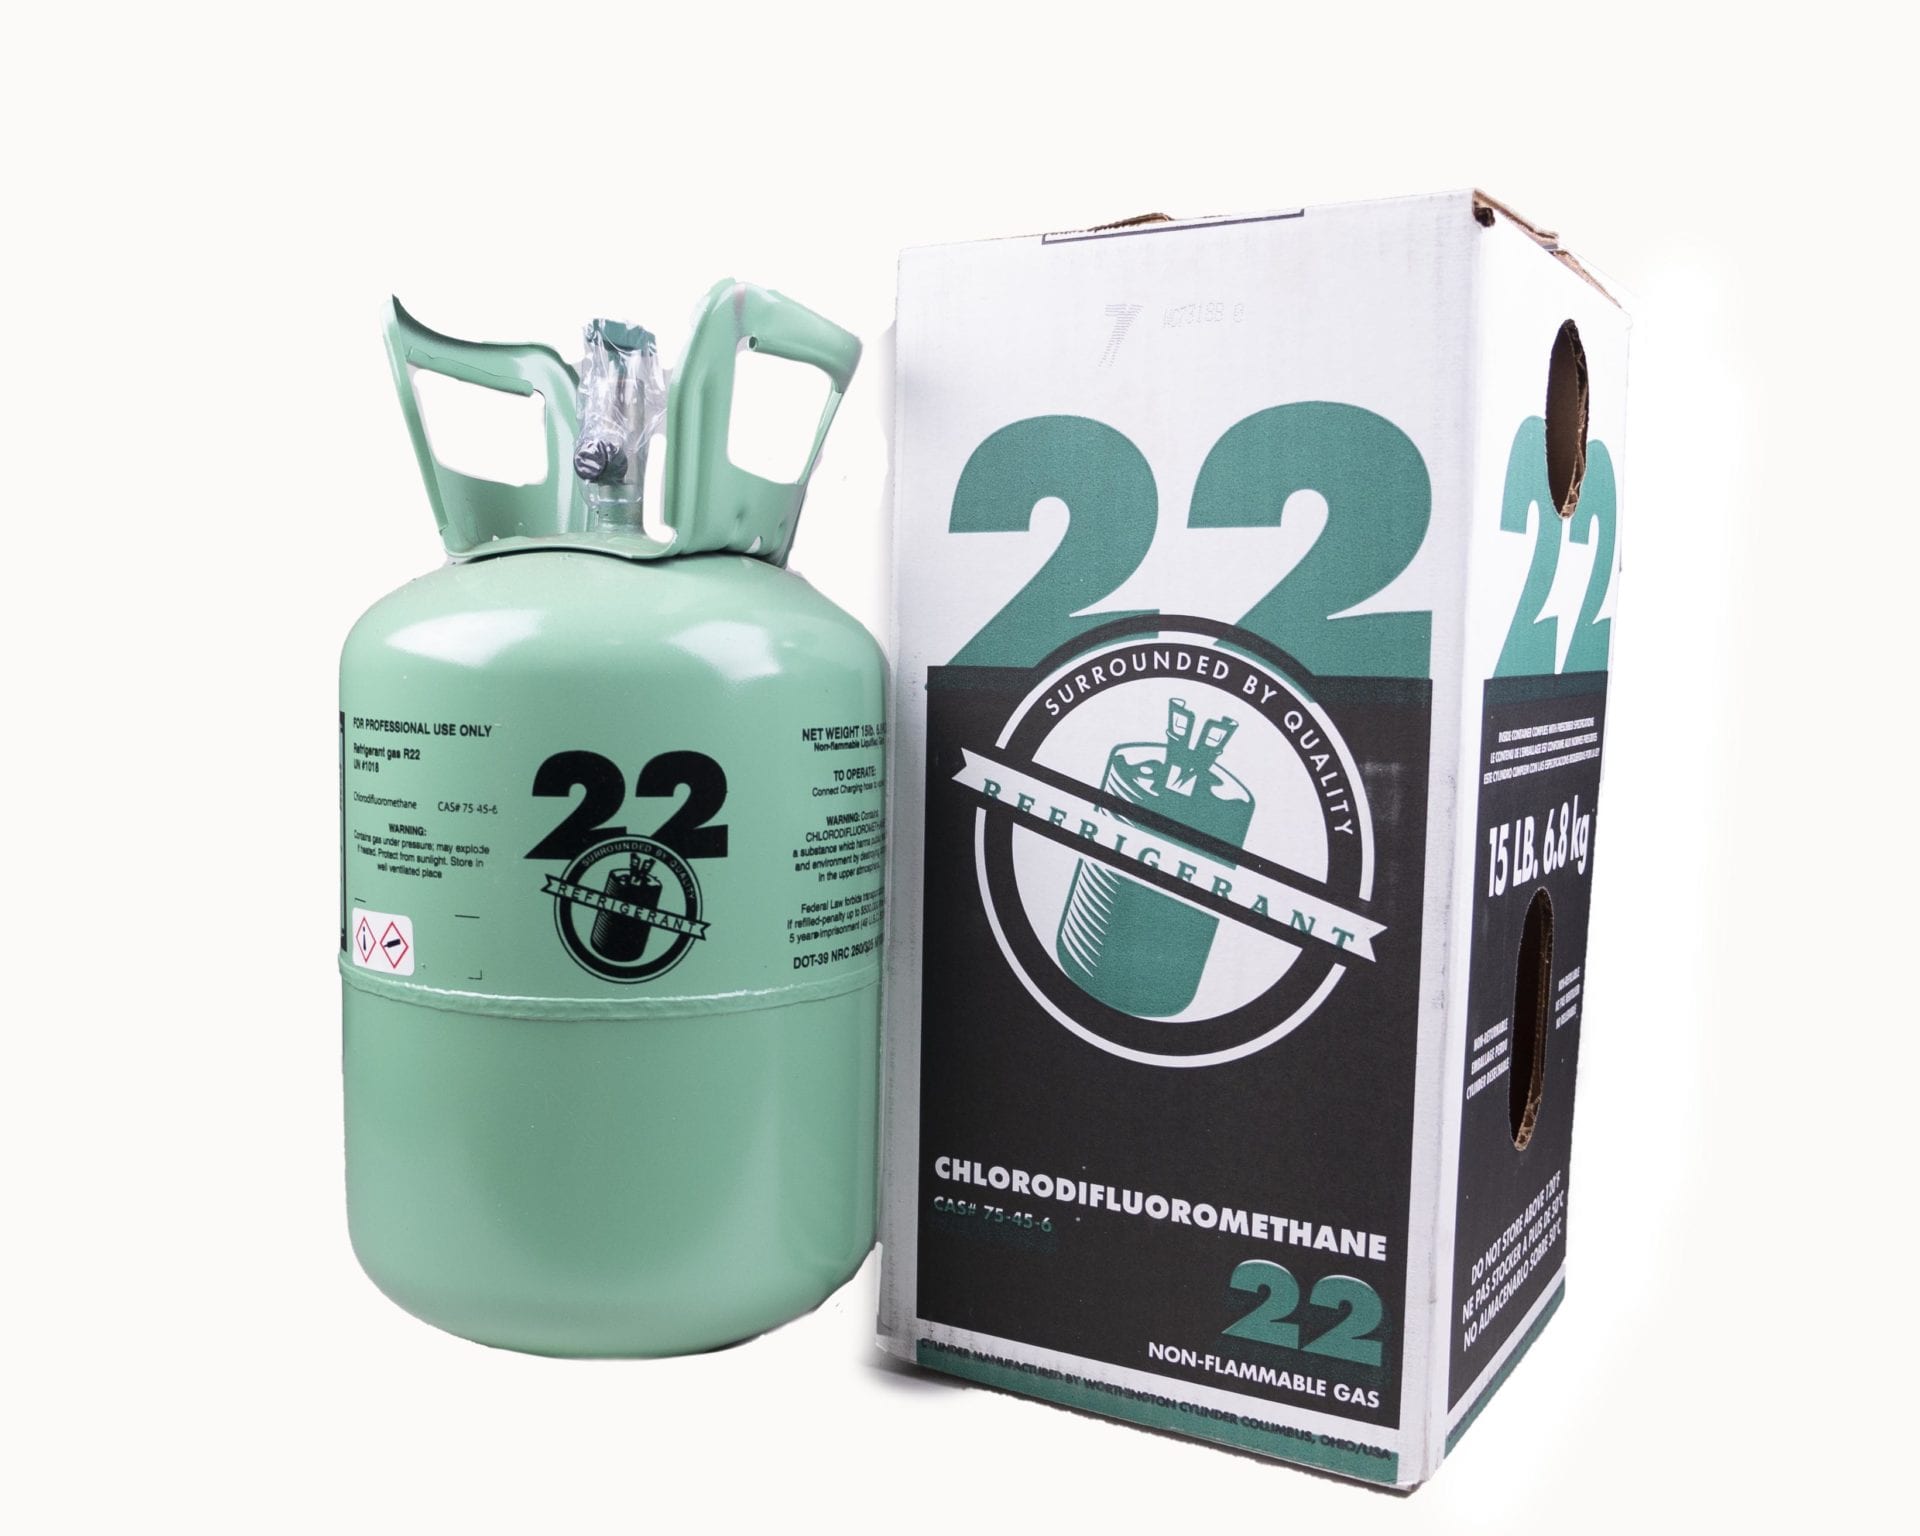 USA R-22 Refrigerant 15lb New Sealed Bottle Free Shipping to Cont US 